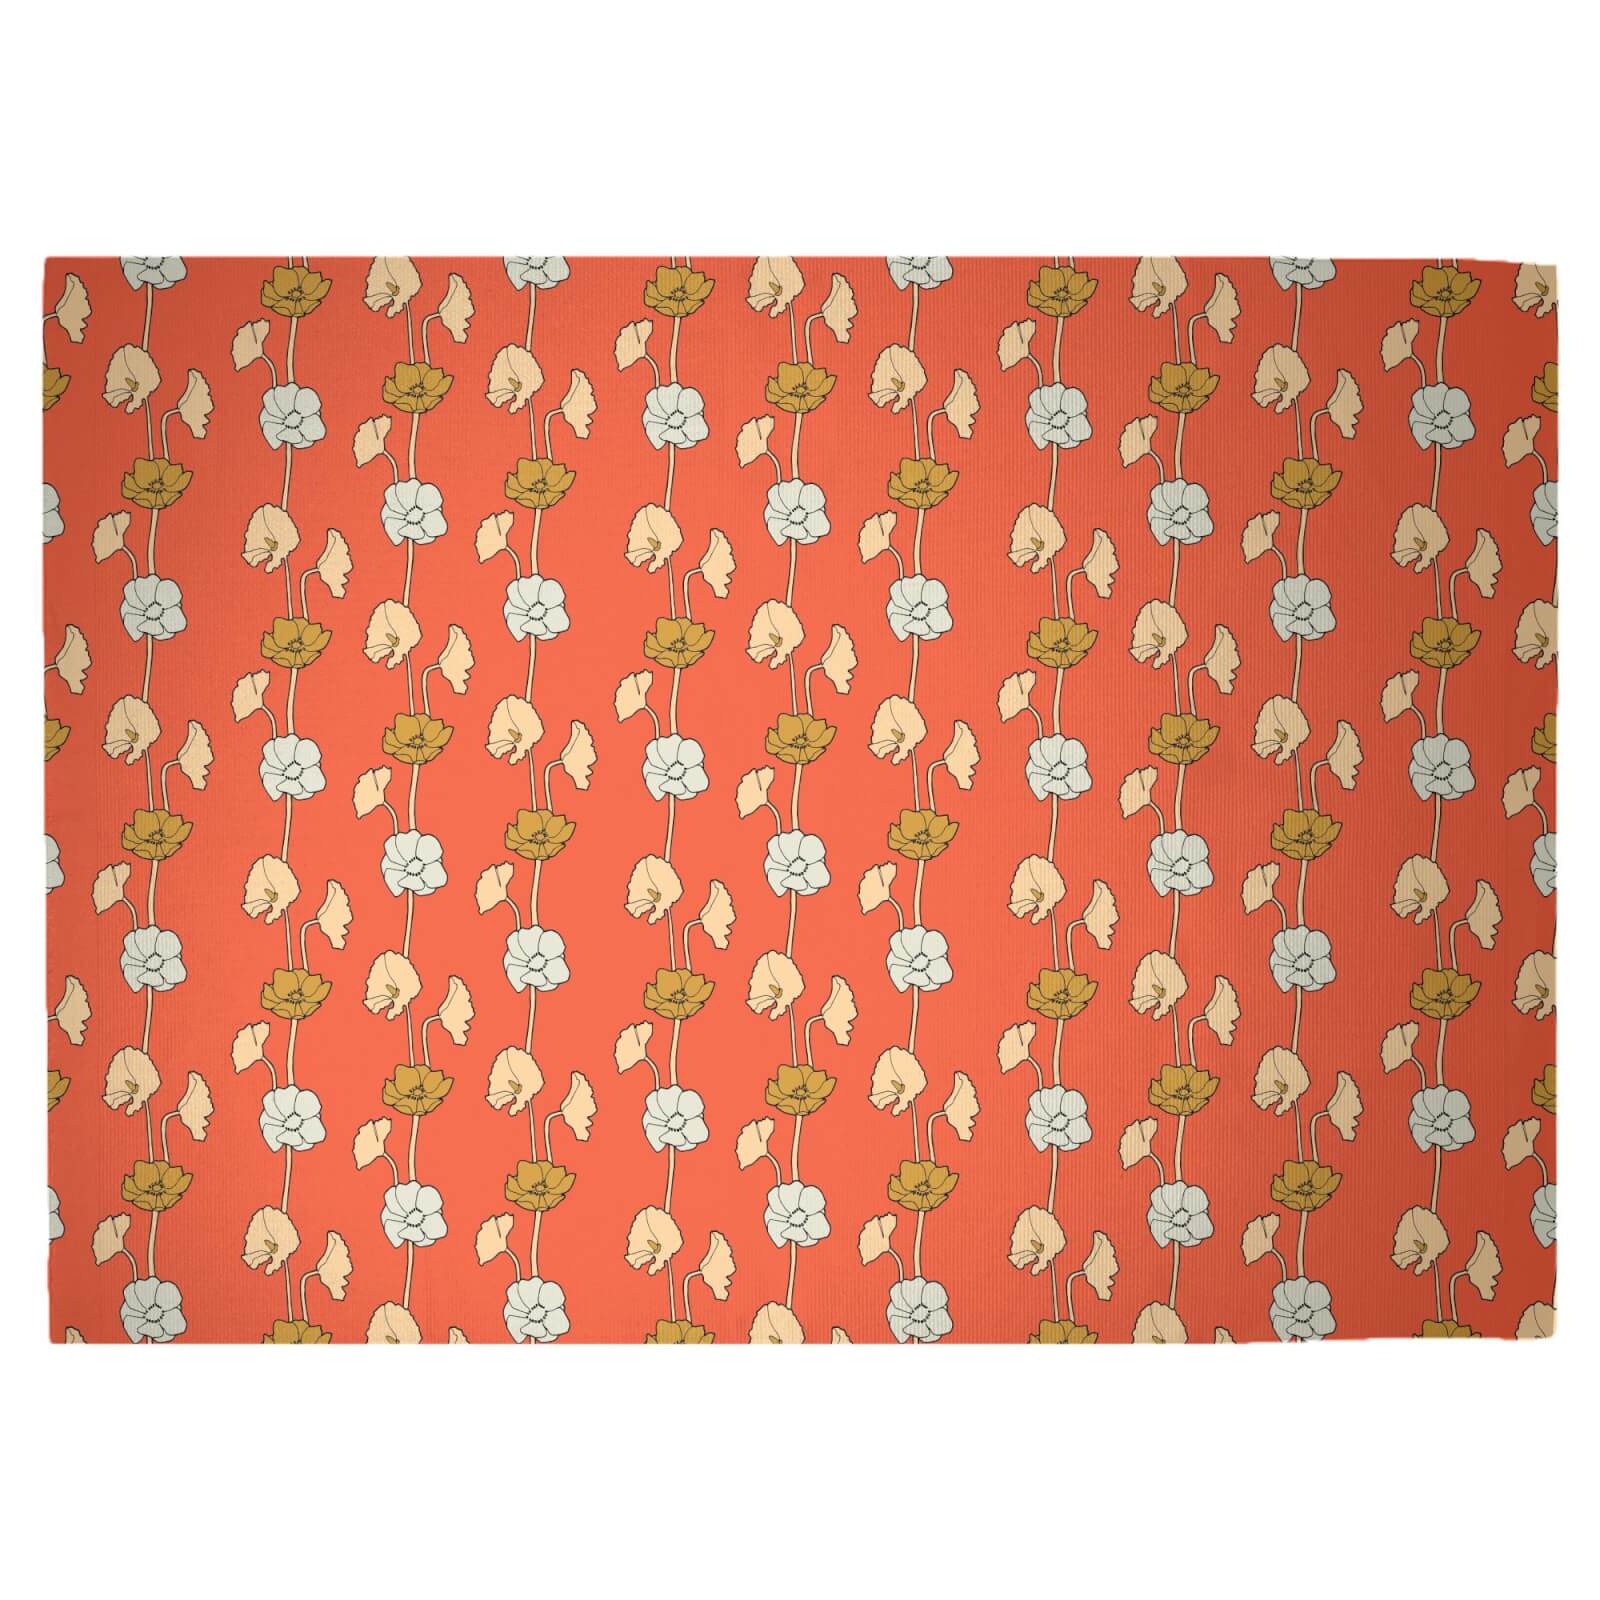 60s Small FLowers Woven Rug - Large